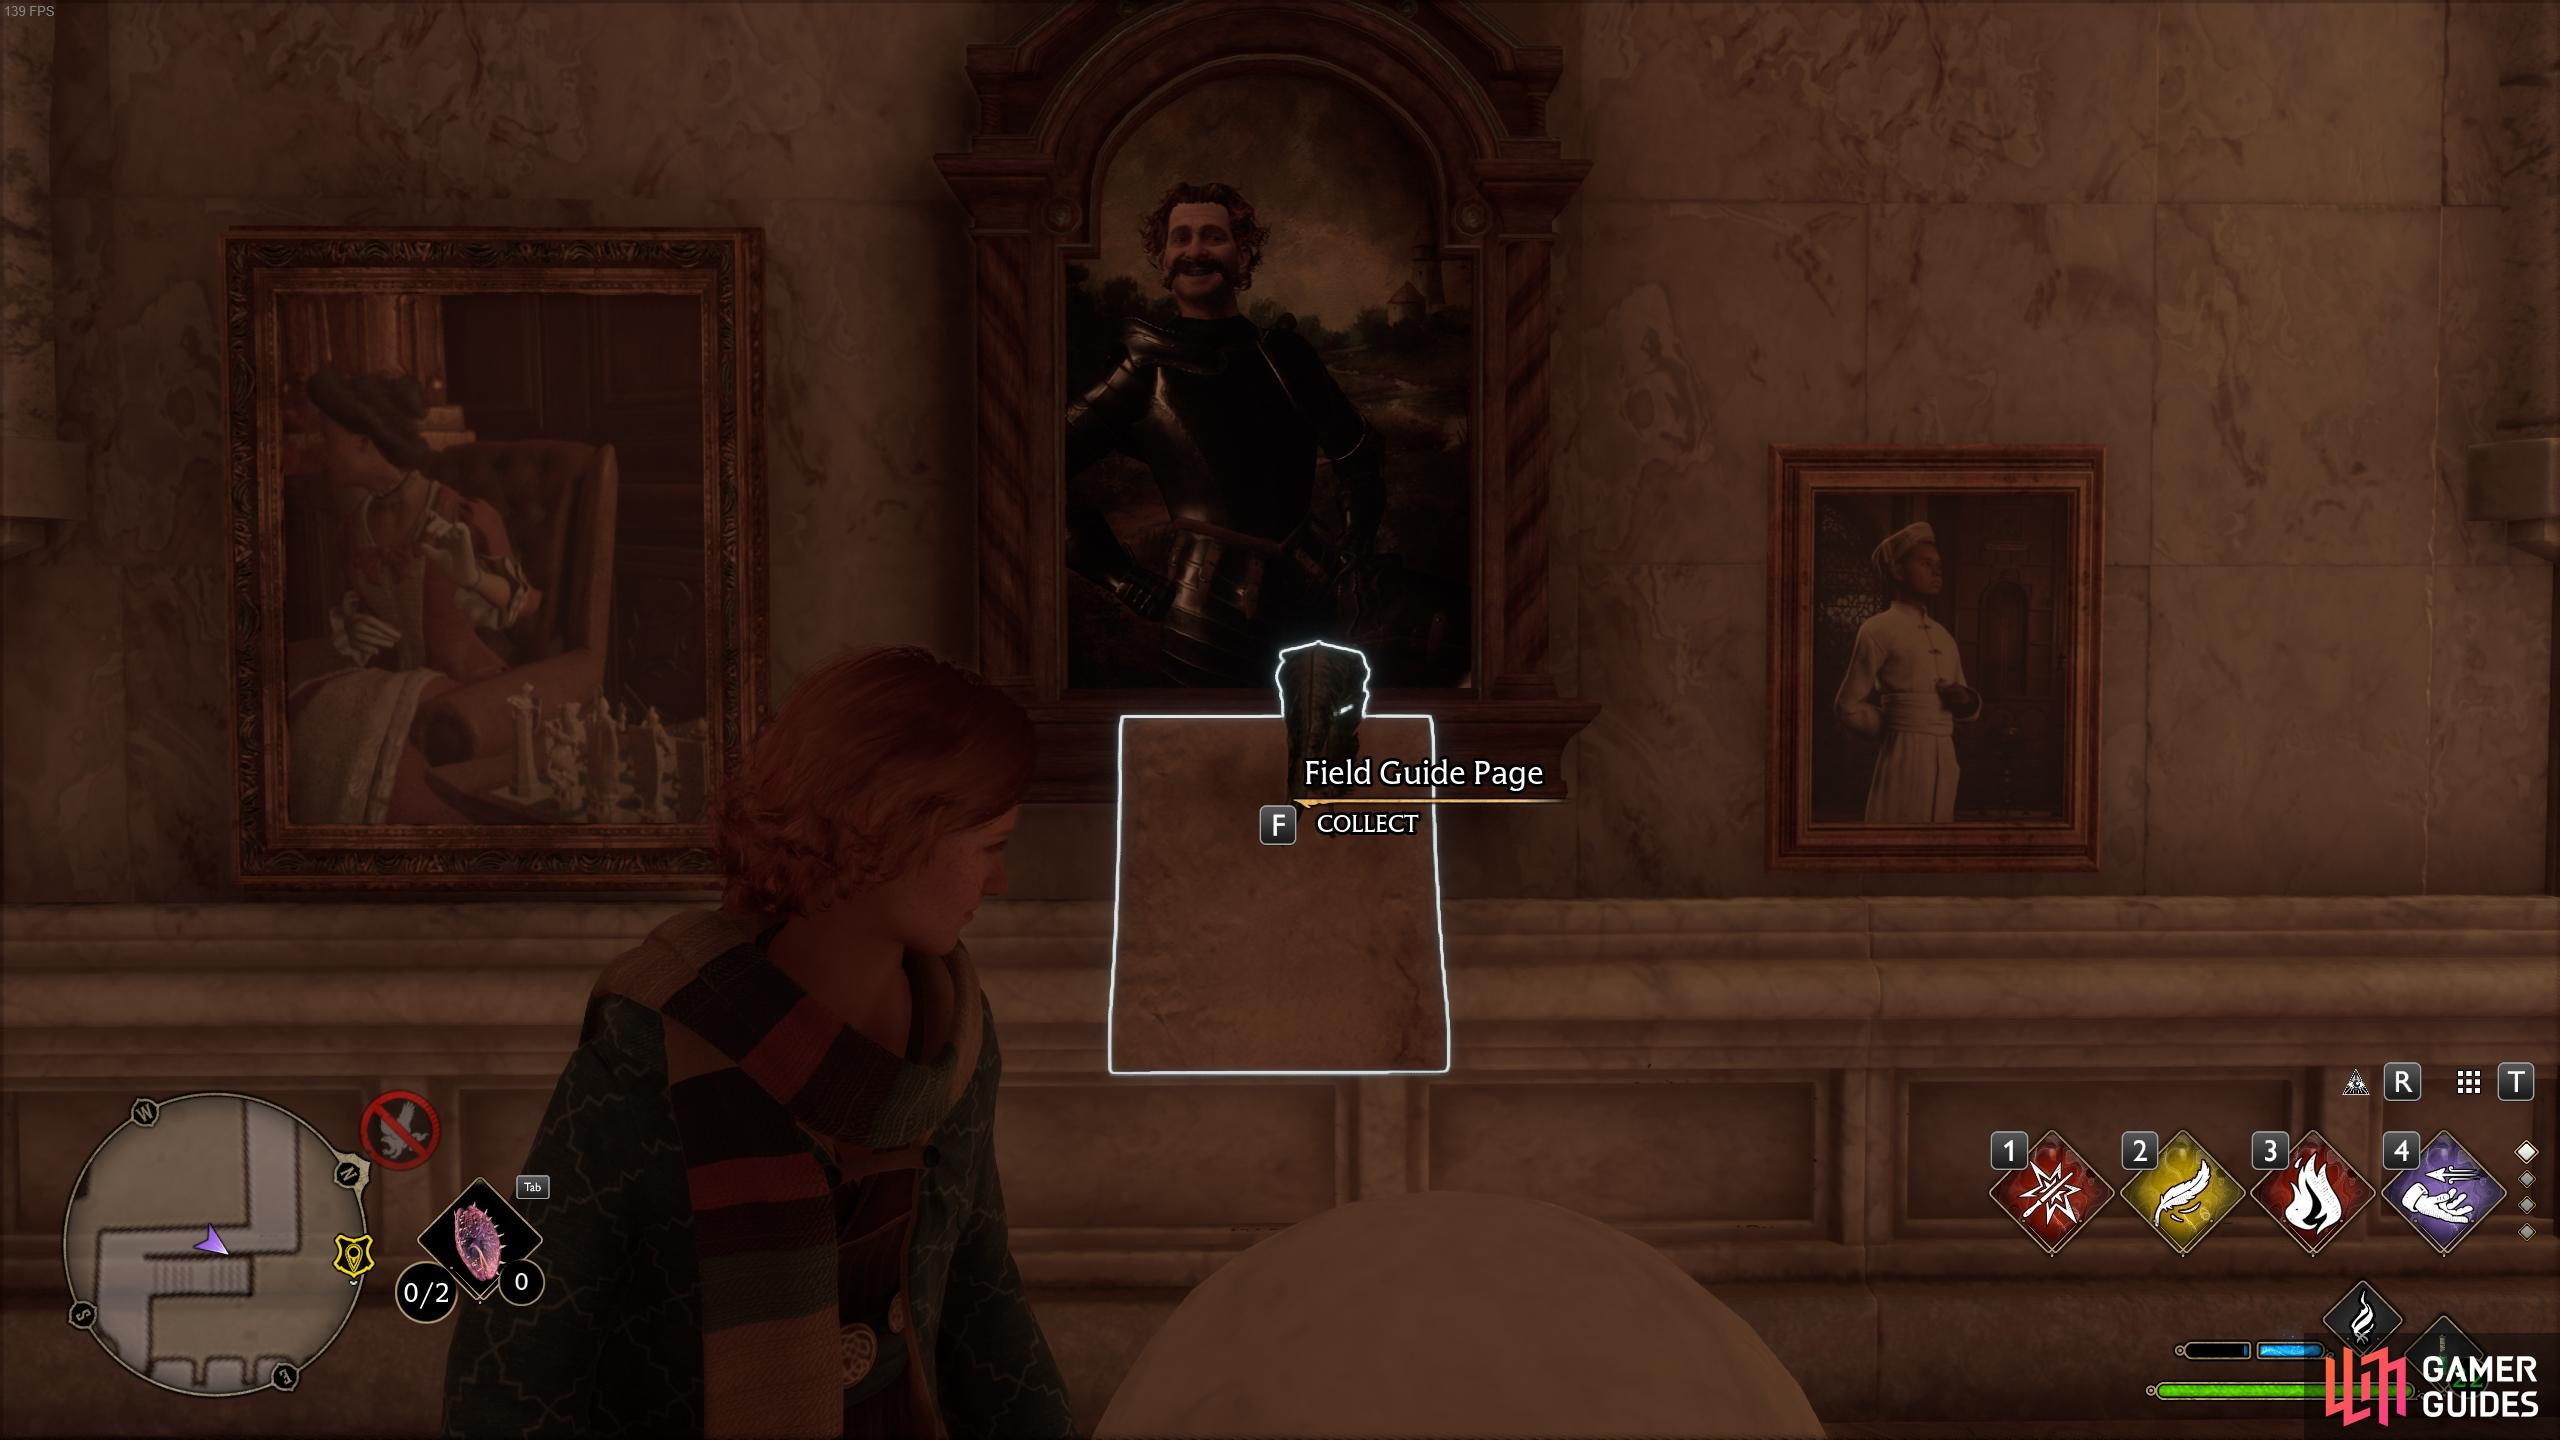 You'll find the page just in front of the portrait.